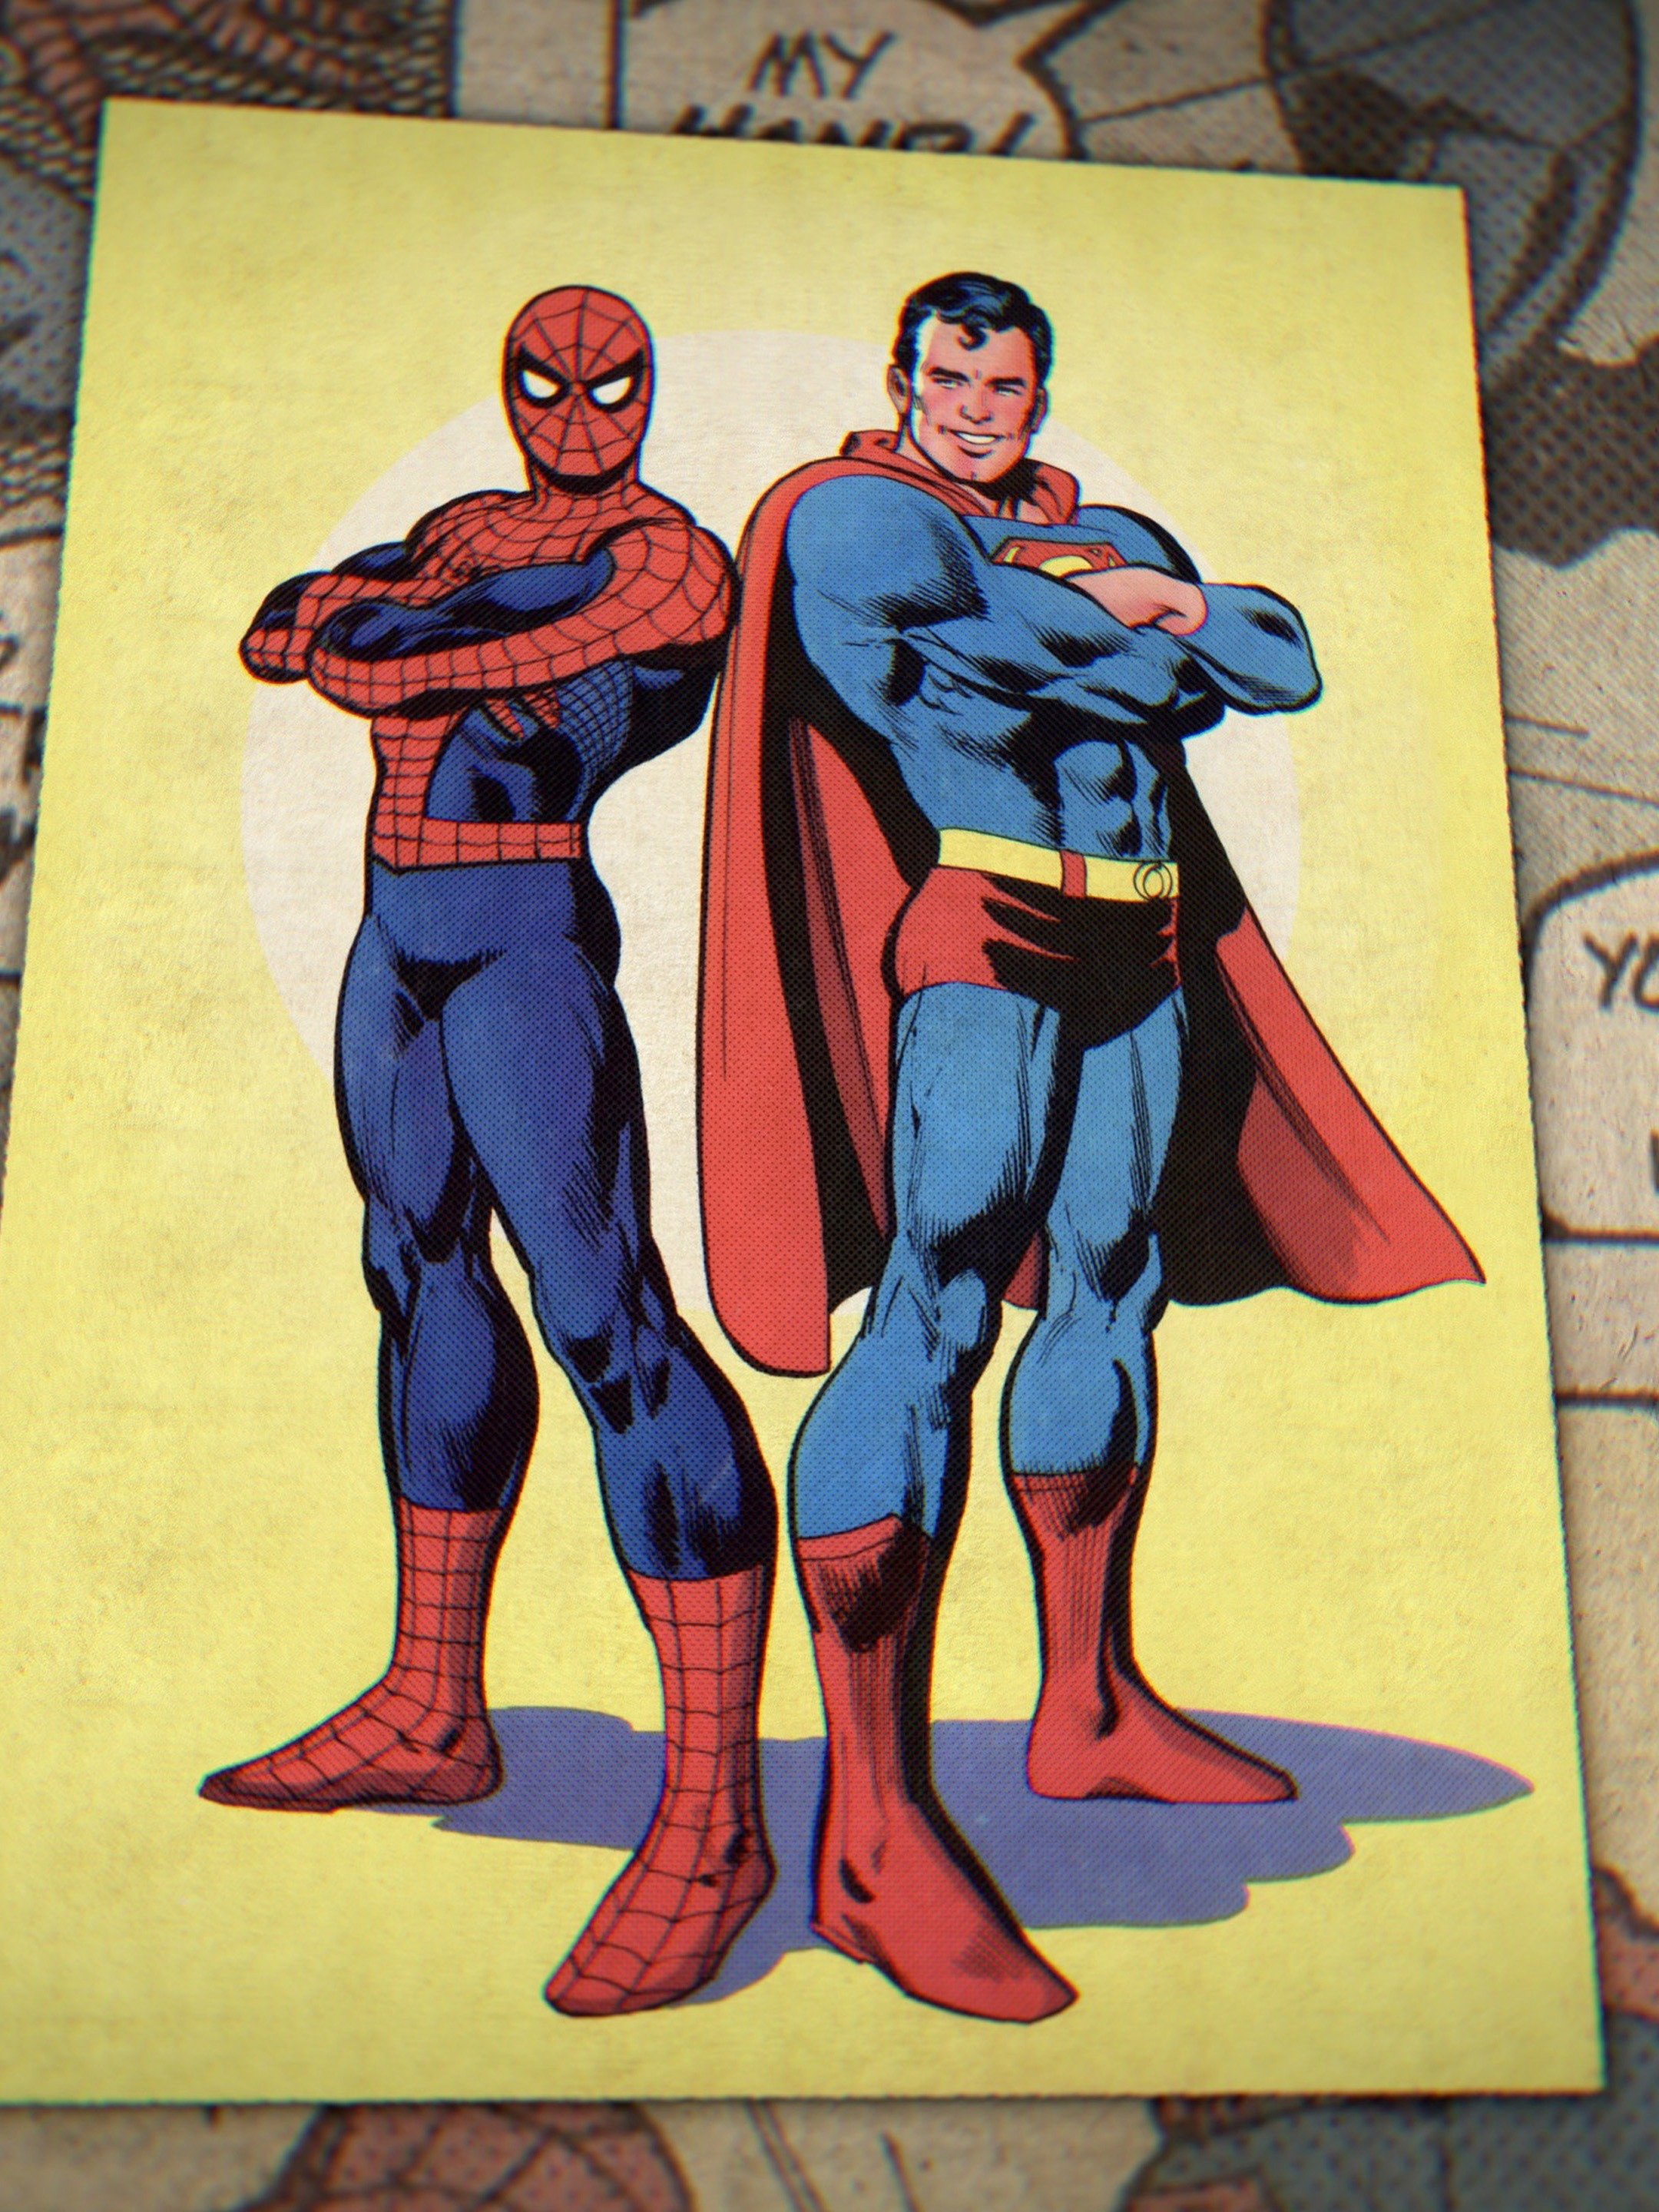 Superman vs. Spiderman Pictures - Rotten Tomatoes